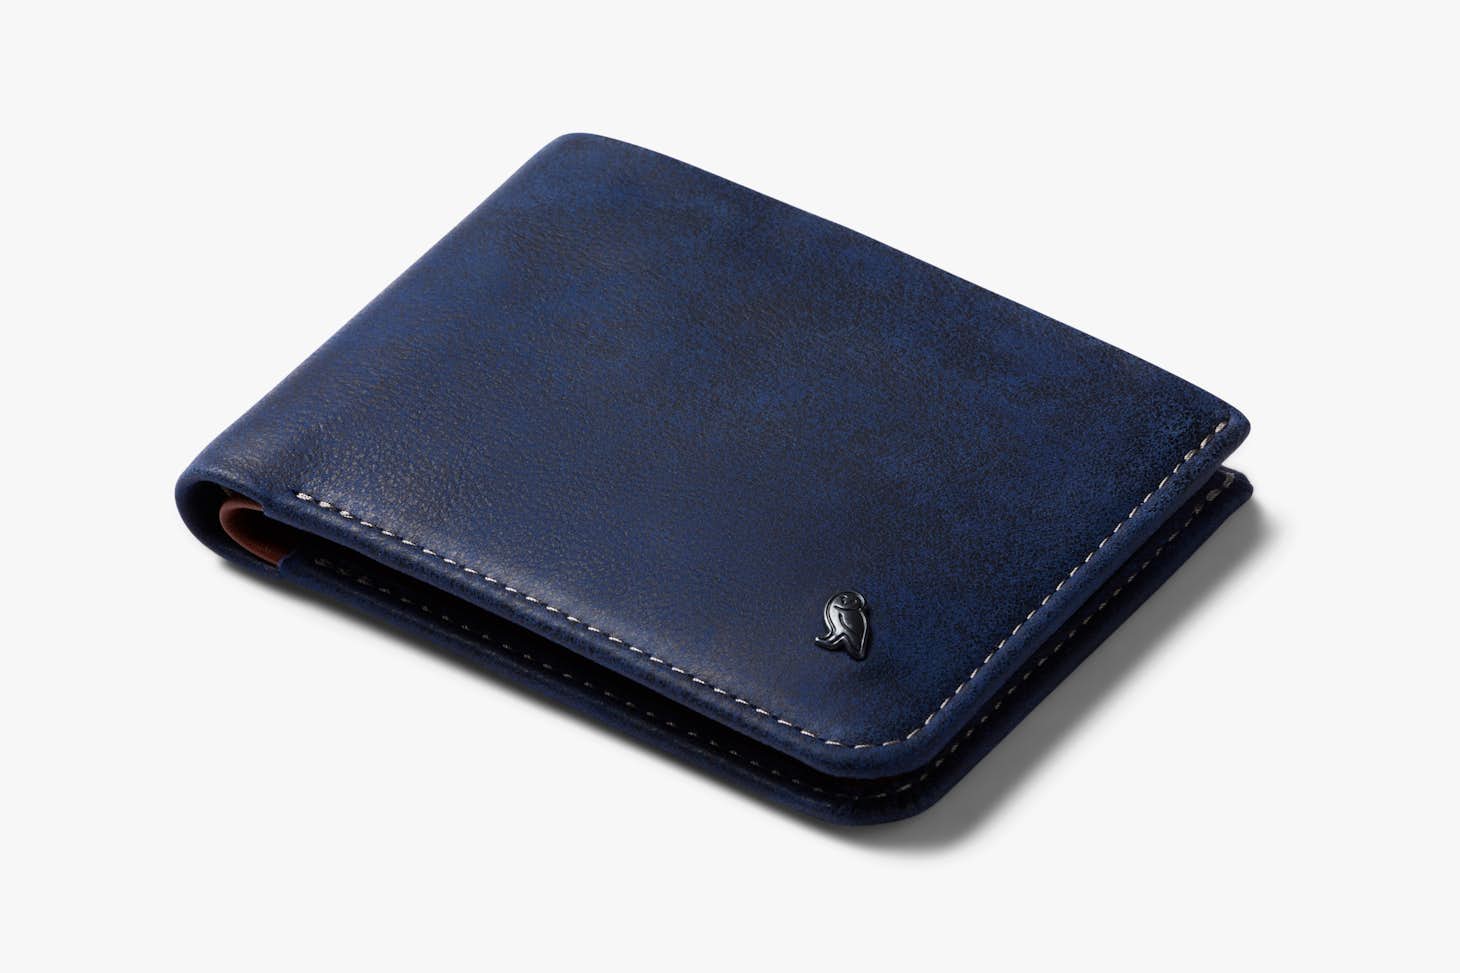 Bellroy Slim Sleeve Wallet Review 2023 - Forbes Vetted